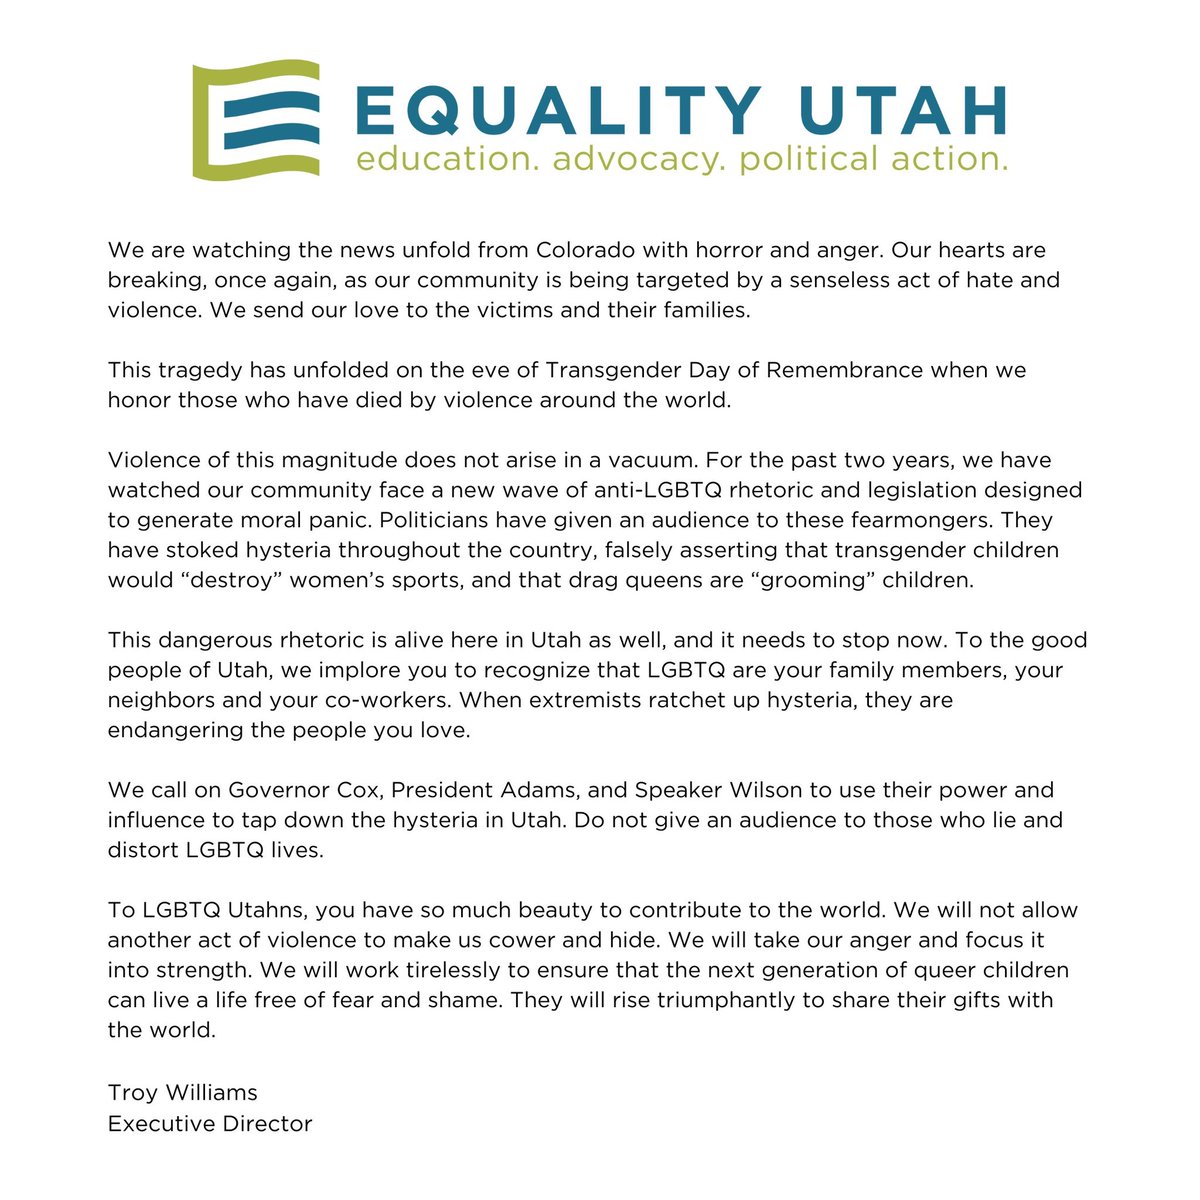 Violence of this scale does not happen in a vacuum. Efforts to intimidate and dehumanize our community have been escalating. We need courageous leaders and allies to stand in solidarity with LGBTQ Americans.